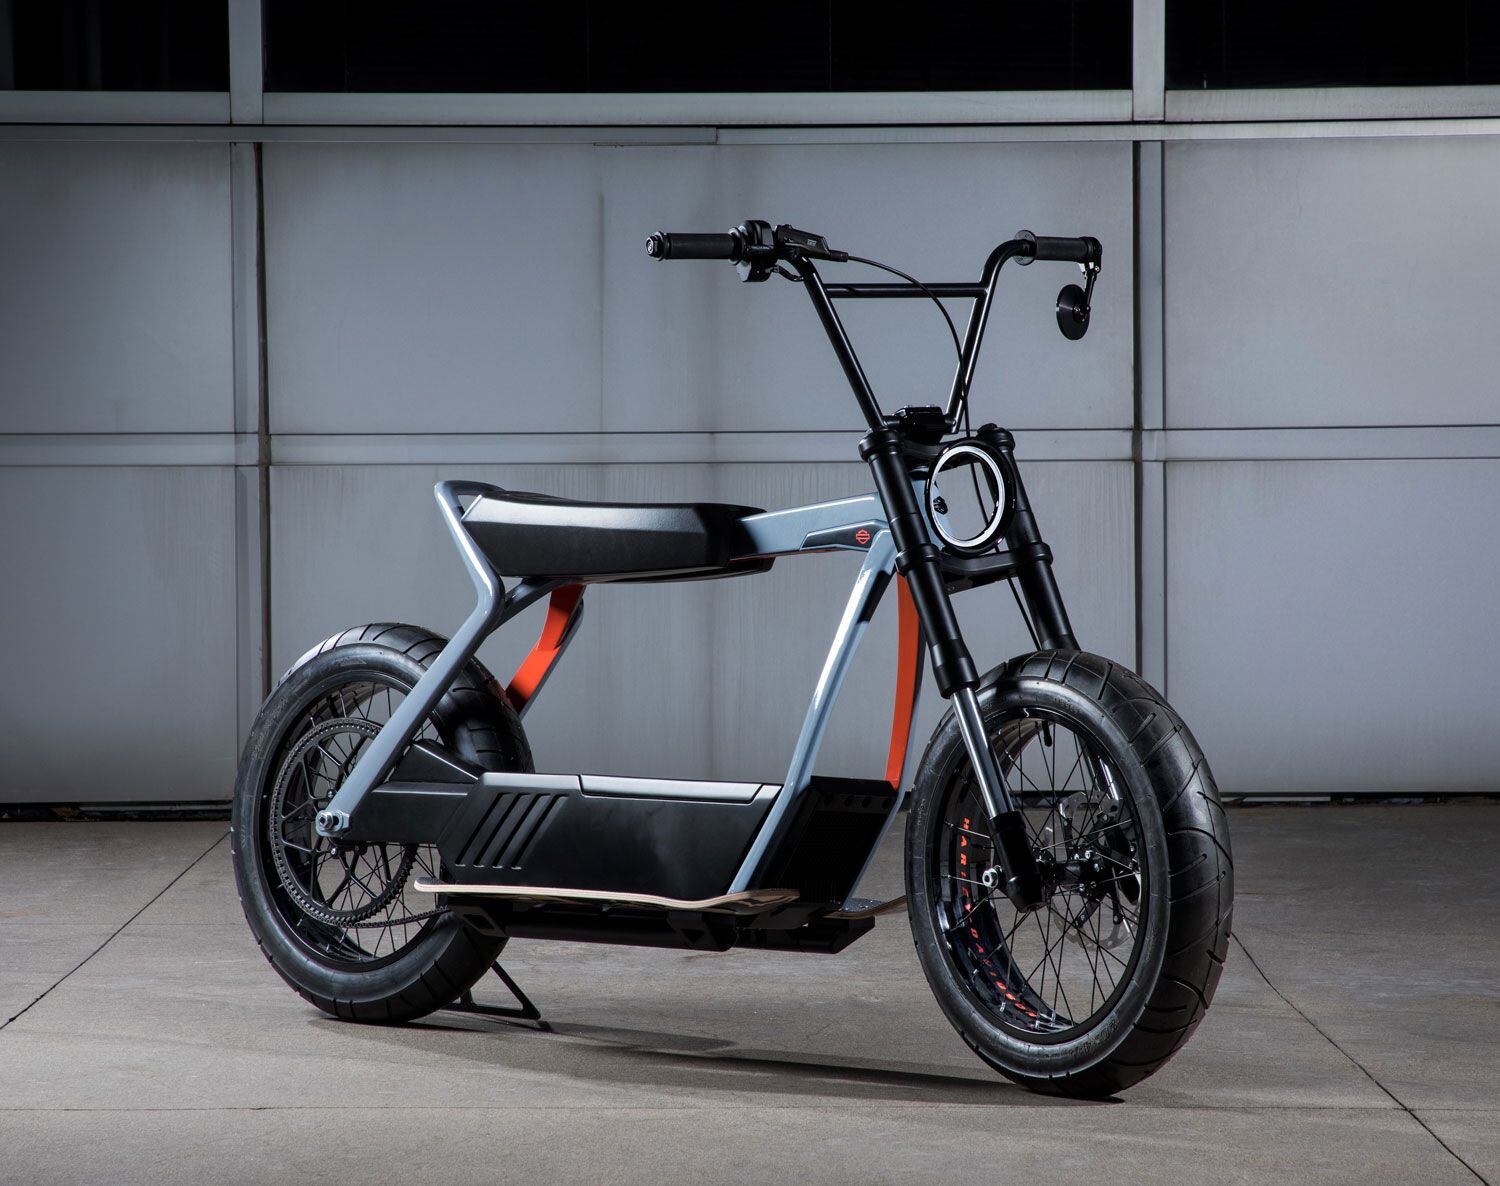 H-D also confirms development in the electric motorcycle space will continue under a separate division, and likely with more focus on urban mobility. Will that signal the return of H-D’s concept escooter?